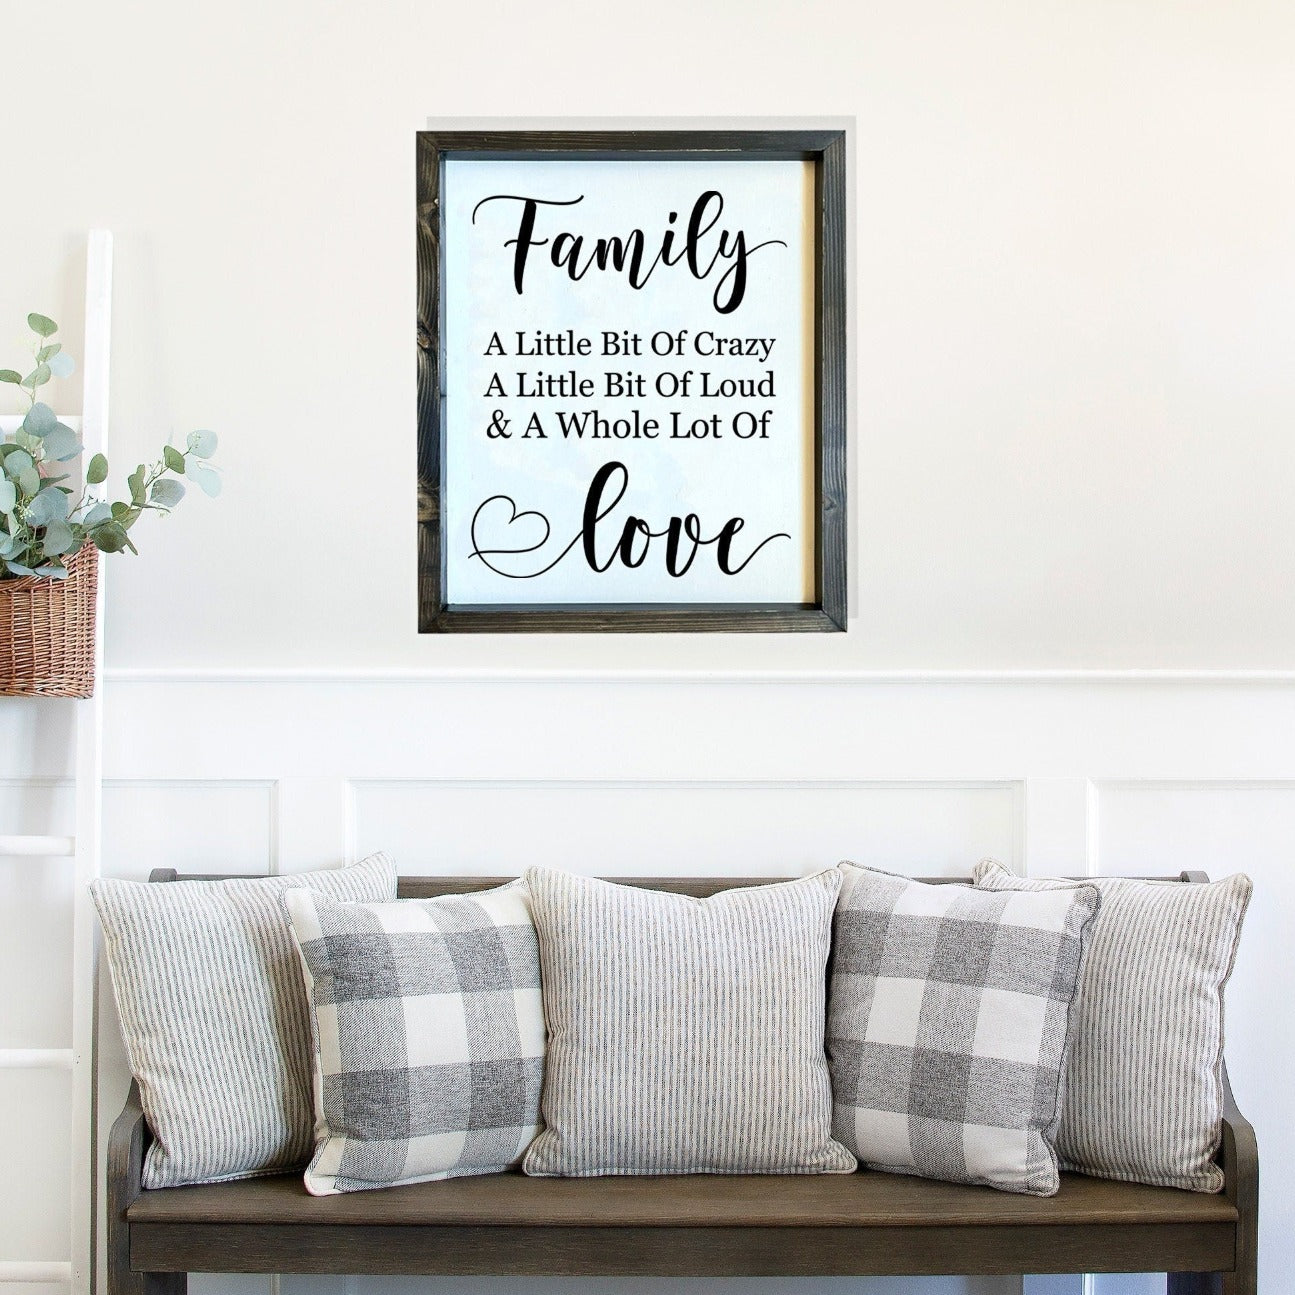 Family a little bit of crazy, a little bit of loud & a whole lot of love wood sign , living room sign.